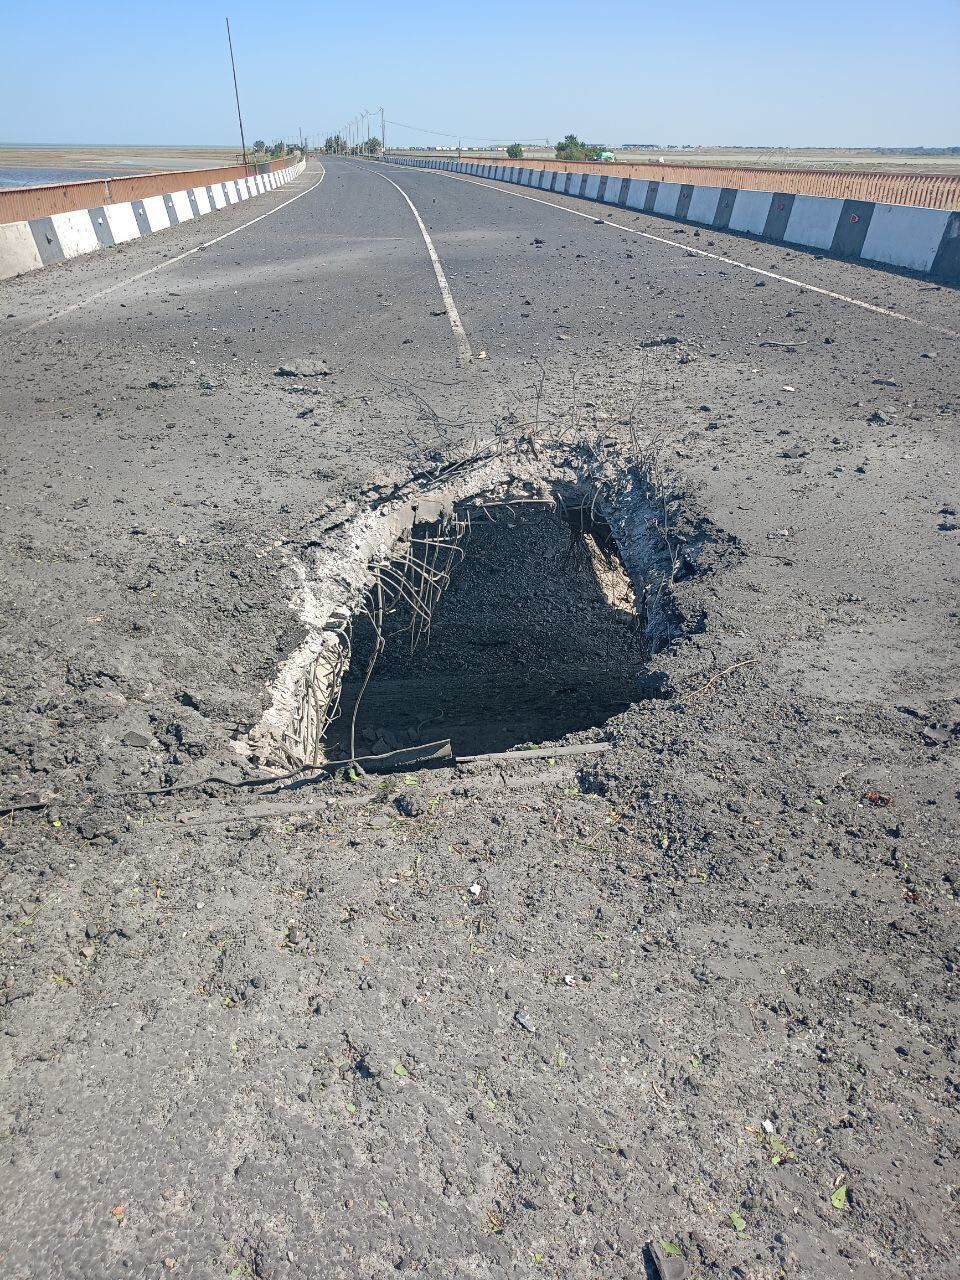 There were explosions in Genichesk, also reported coming over the Chongar bridge. Video